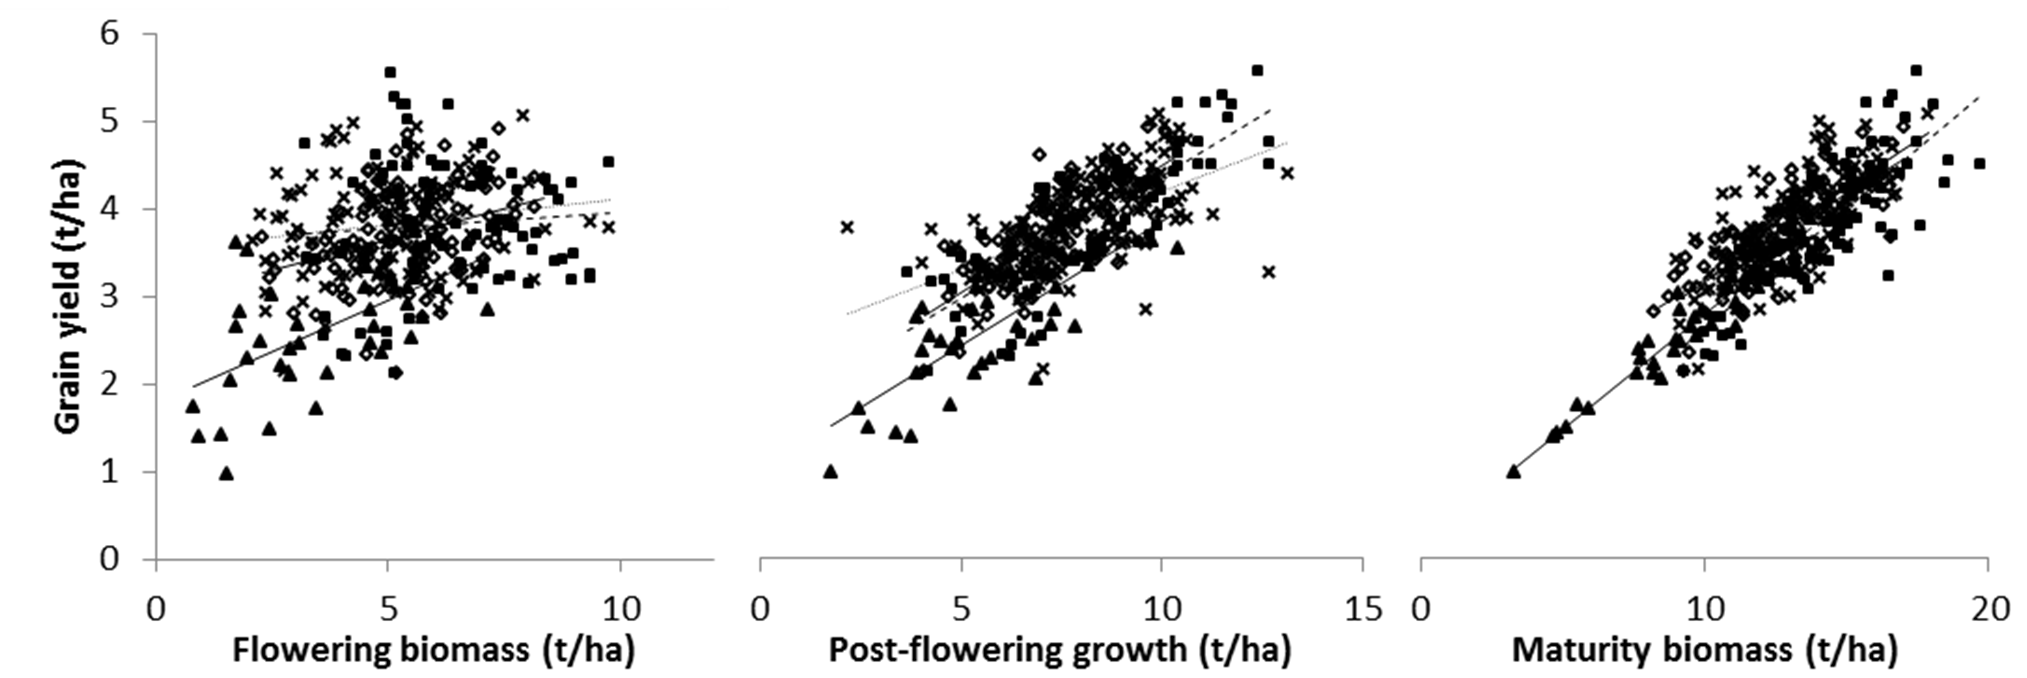 Figure 3. Relationship between grain yield and biomass at flowering, growth post-flowering and biomass at maturity in canola trials at Wagga Wagga (×), Finley (▪), Ganmain (▲) and Condobolin (◊) in 2016.